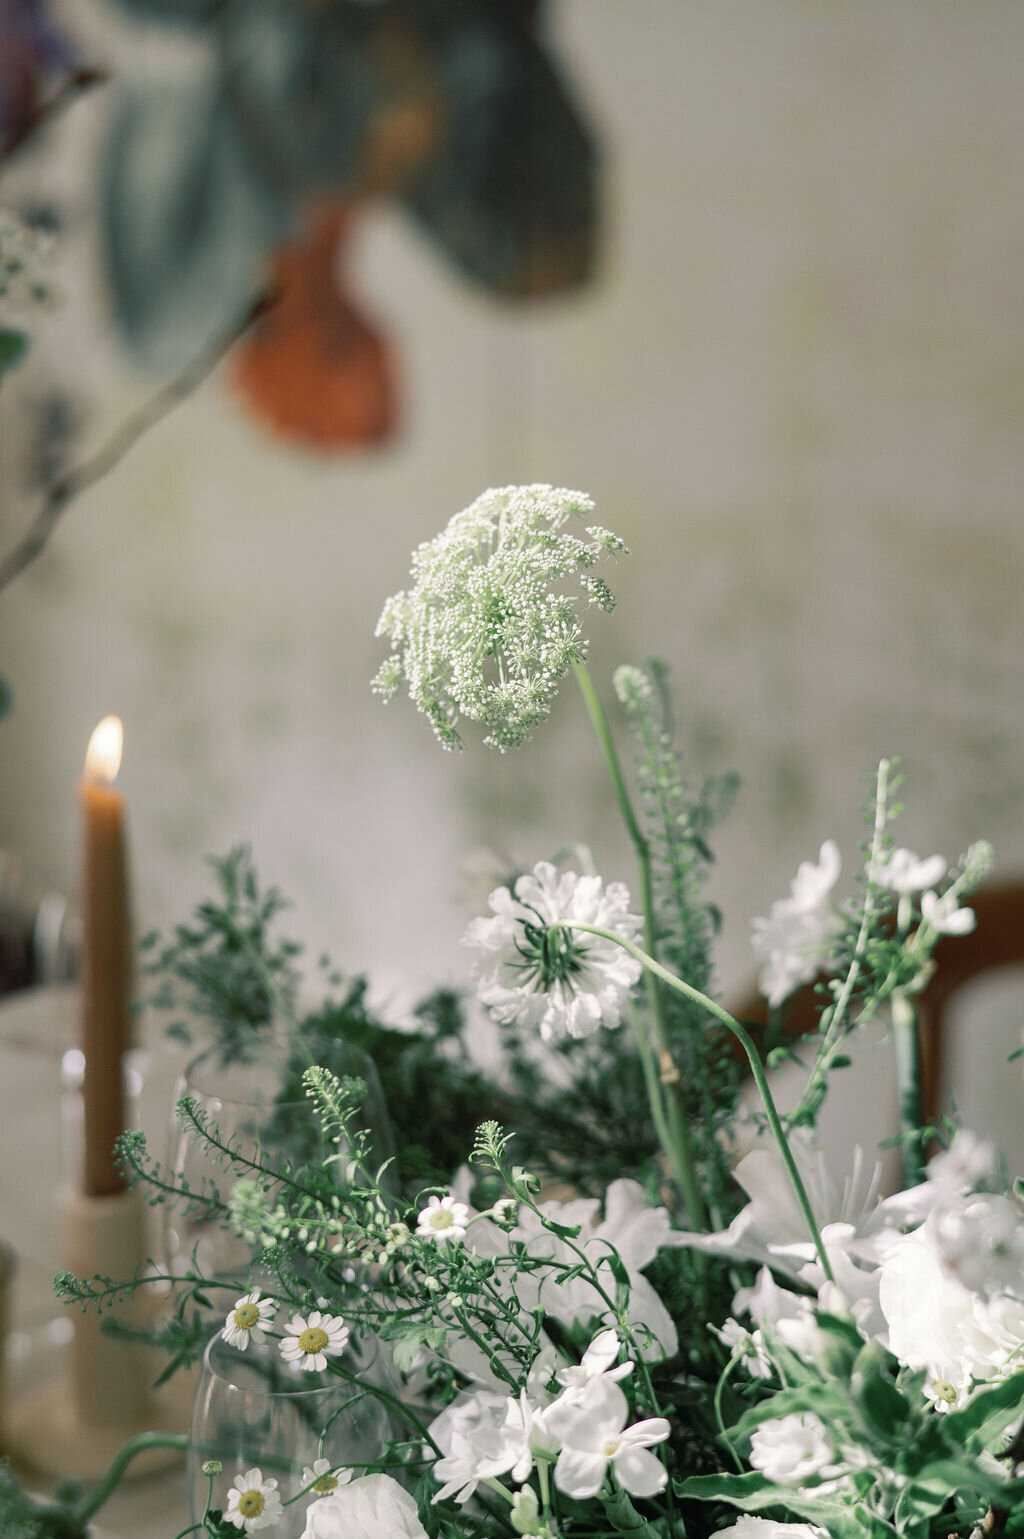 Minimal White and Green Centerpieces